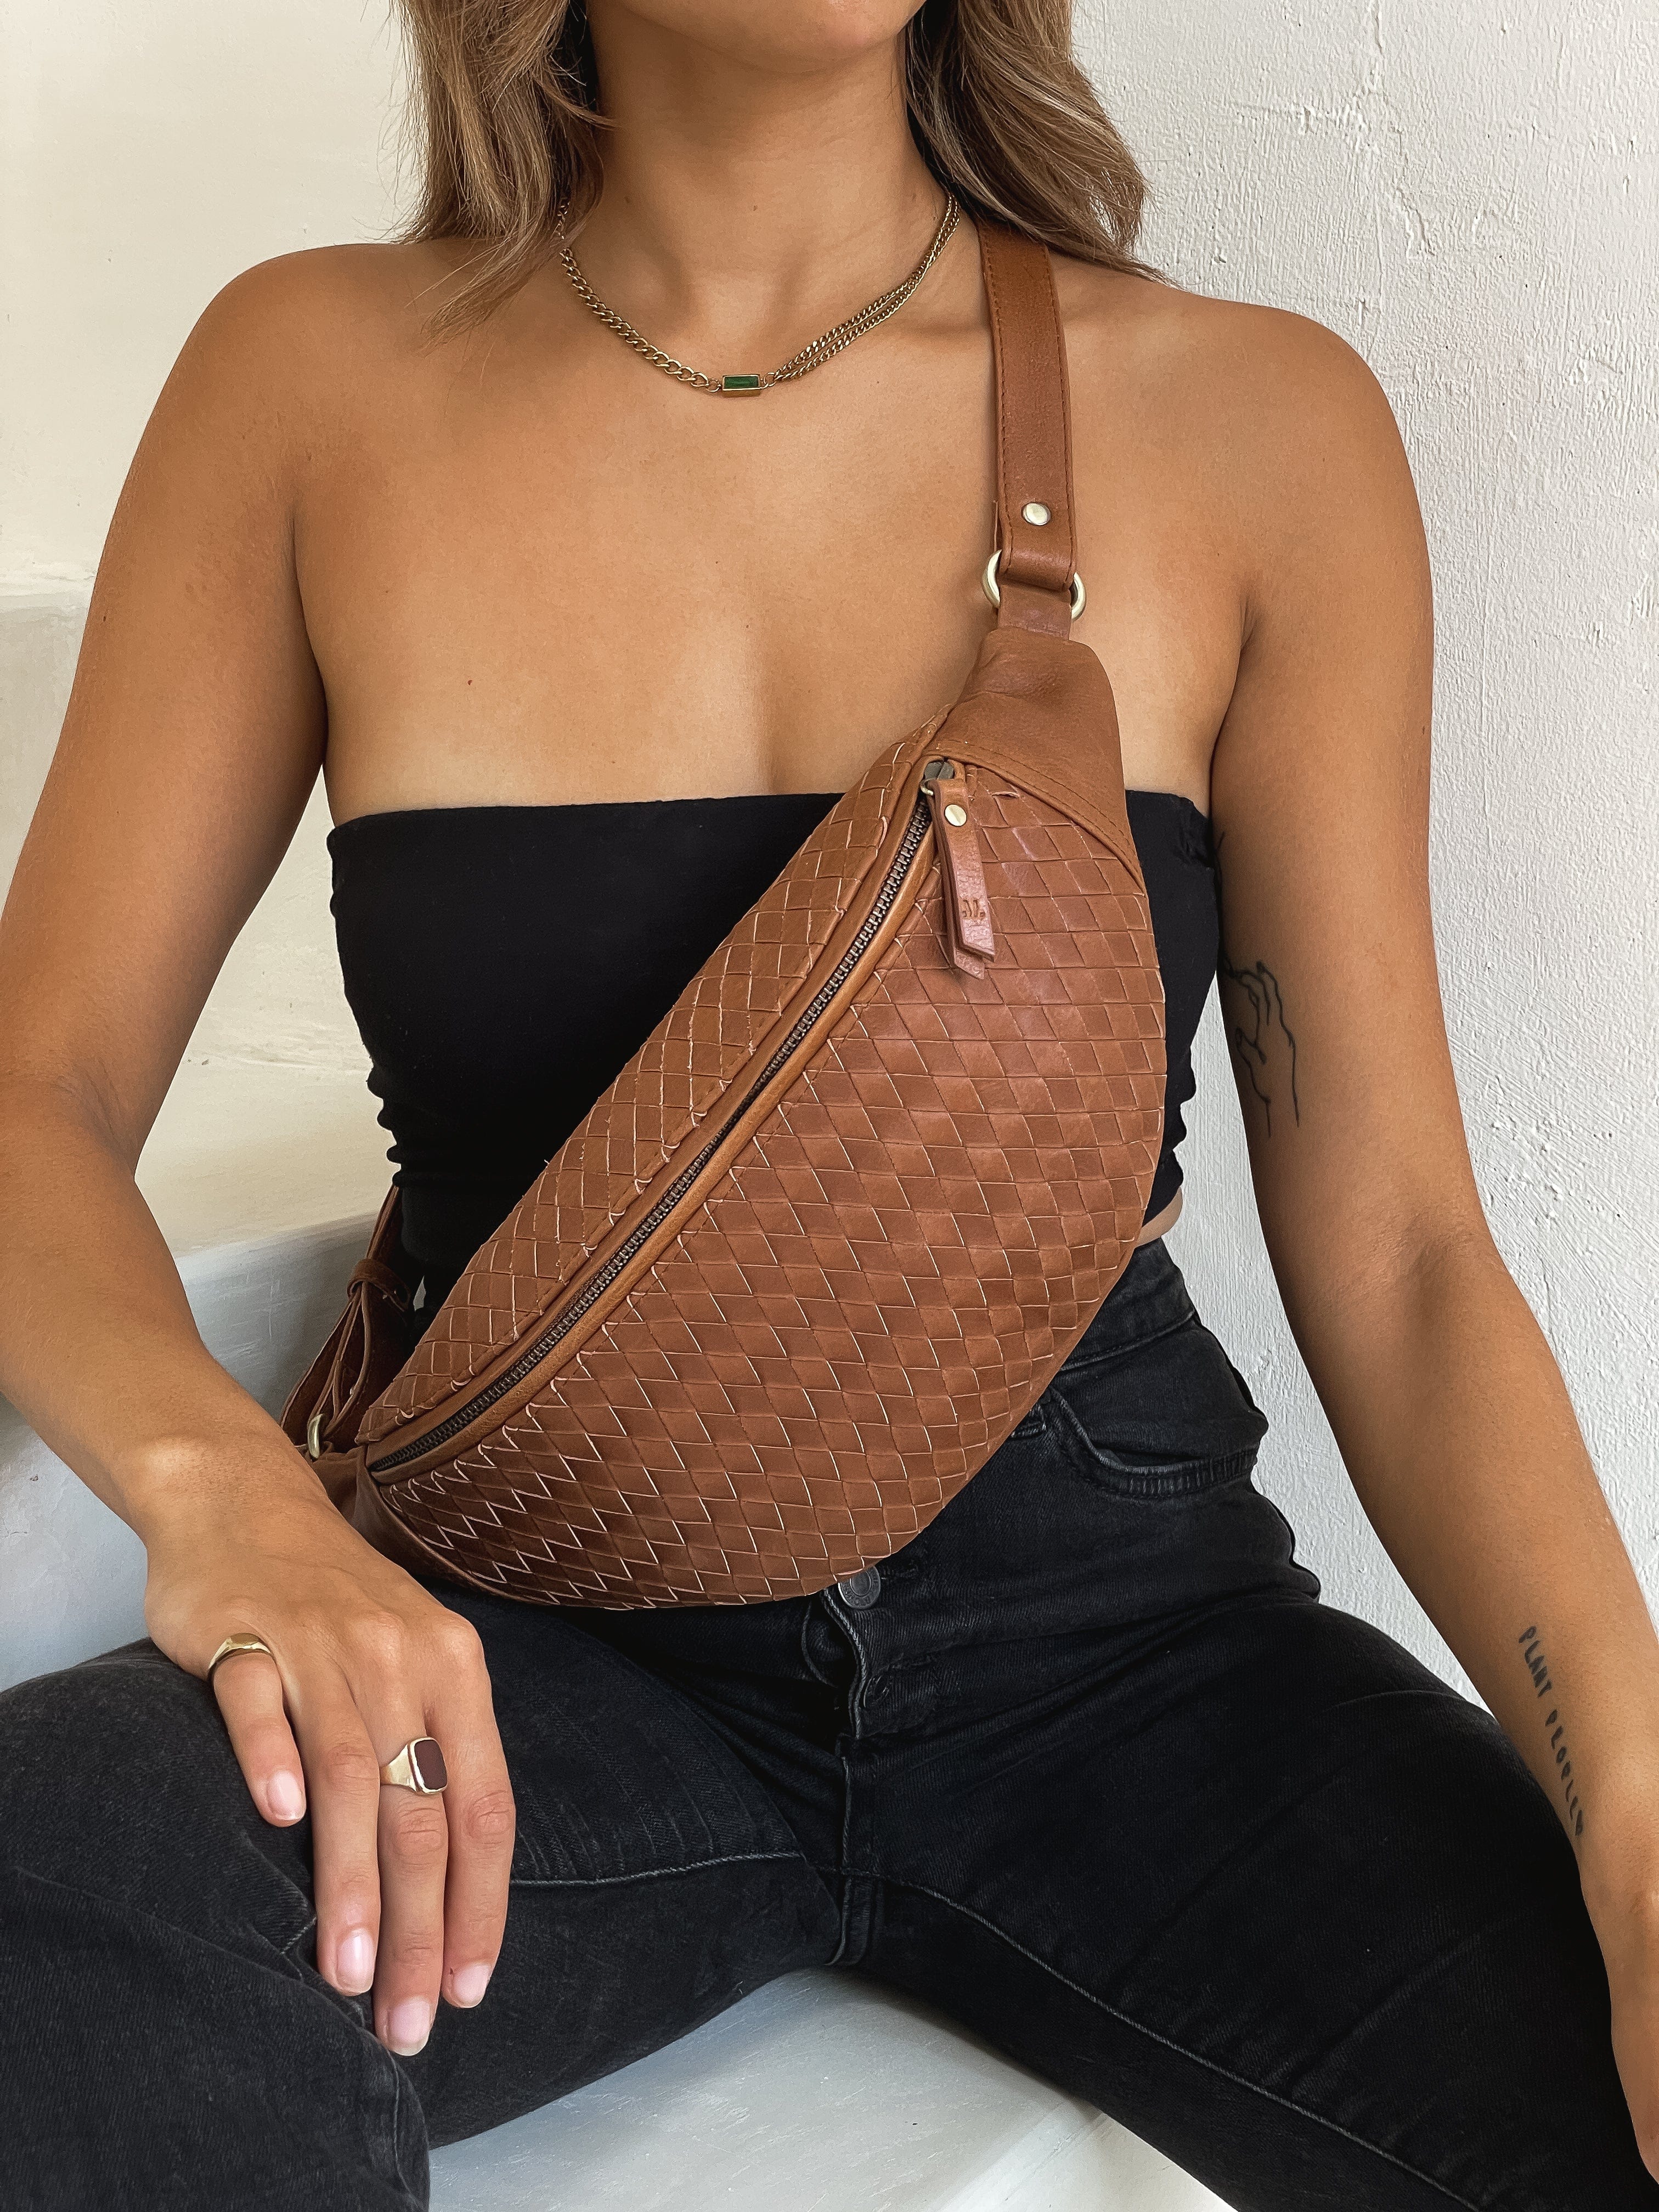 Bumbag Other Leathers - Handbags